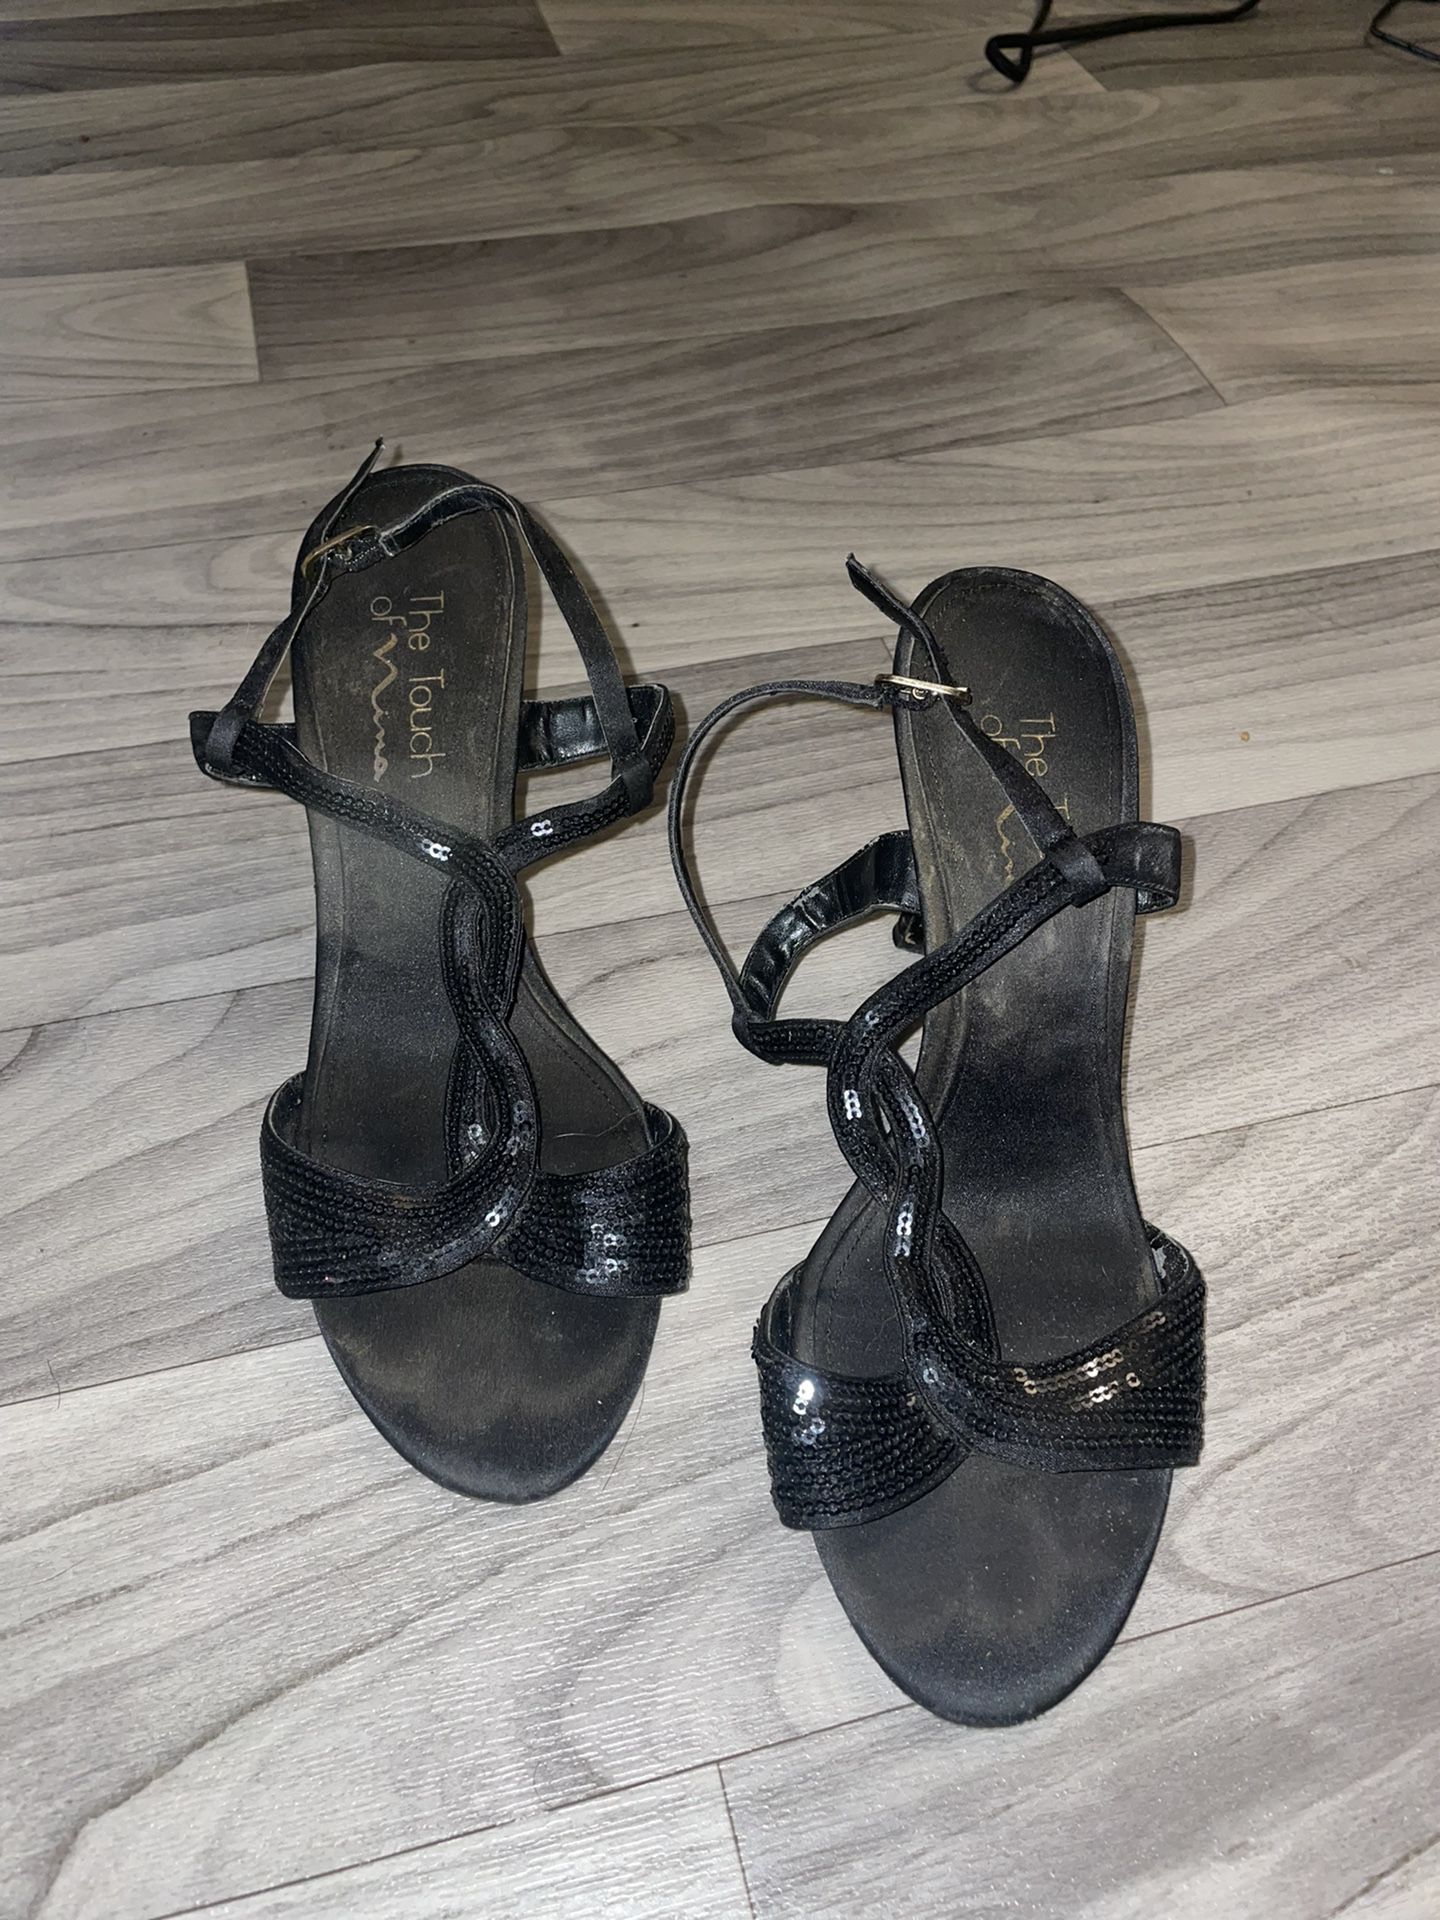 4” Used Black Sequence Heels